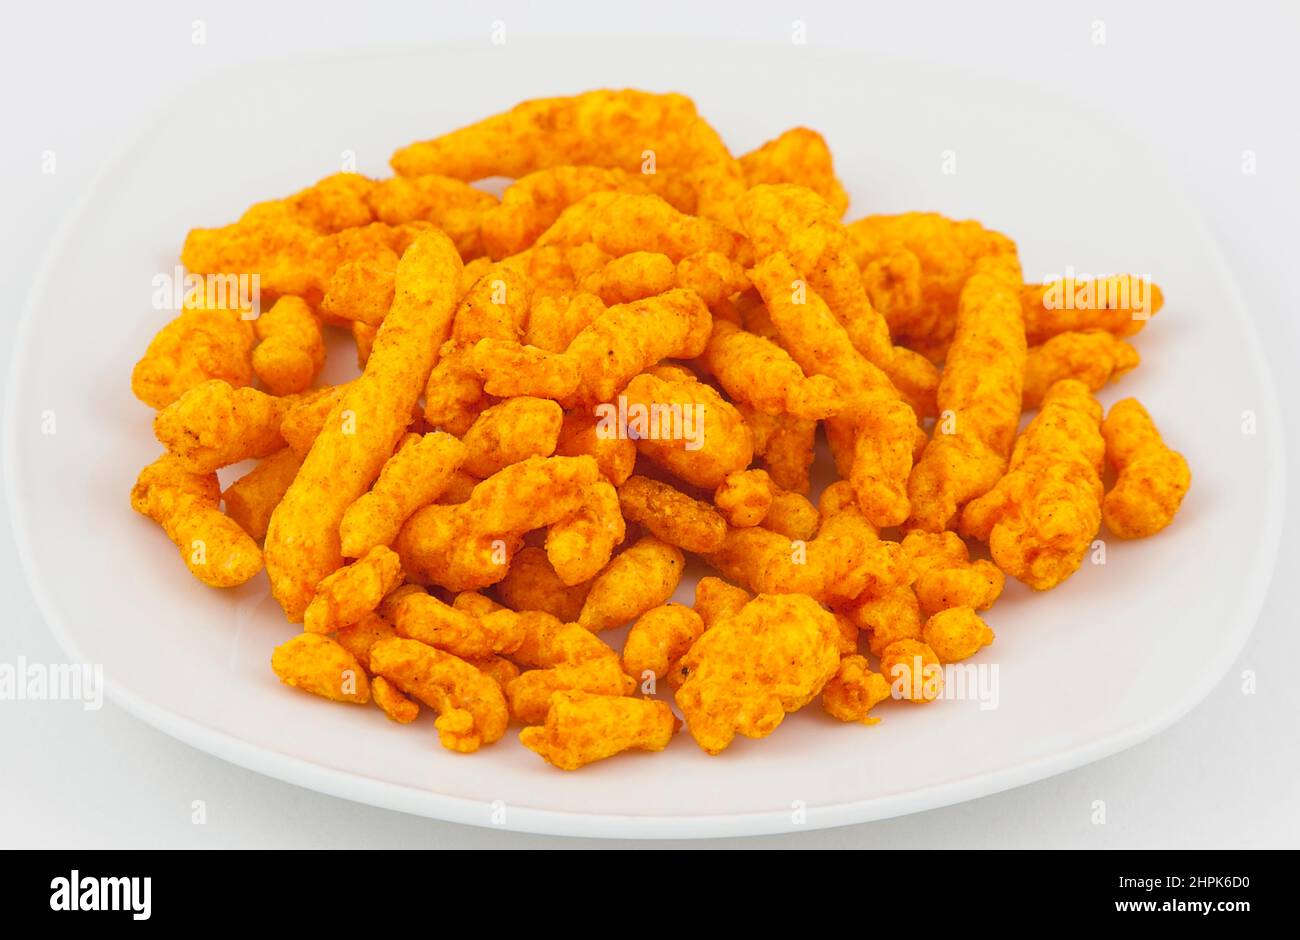 Food, Snacks, Spicy baked corn fries. Stock Photo